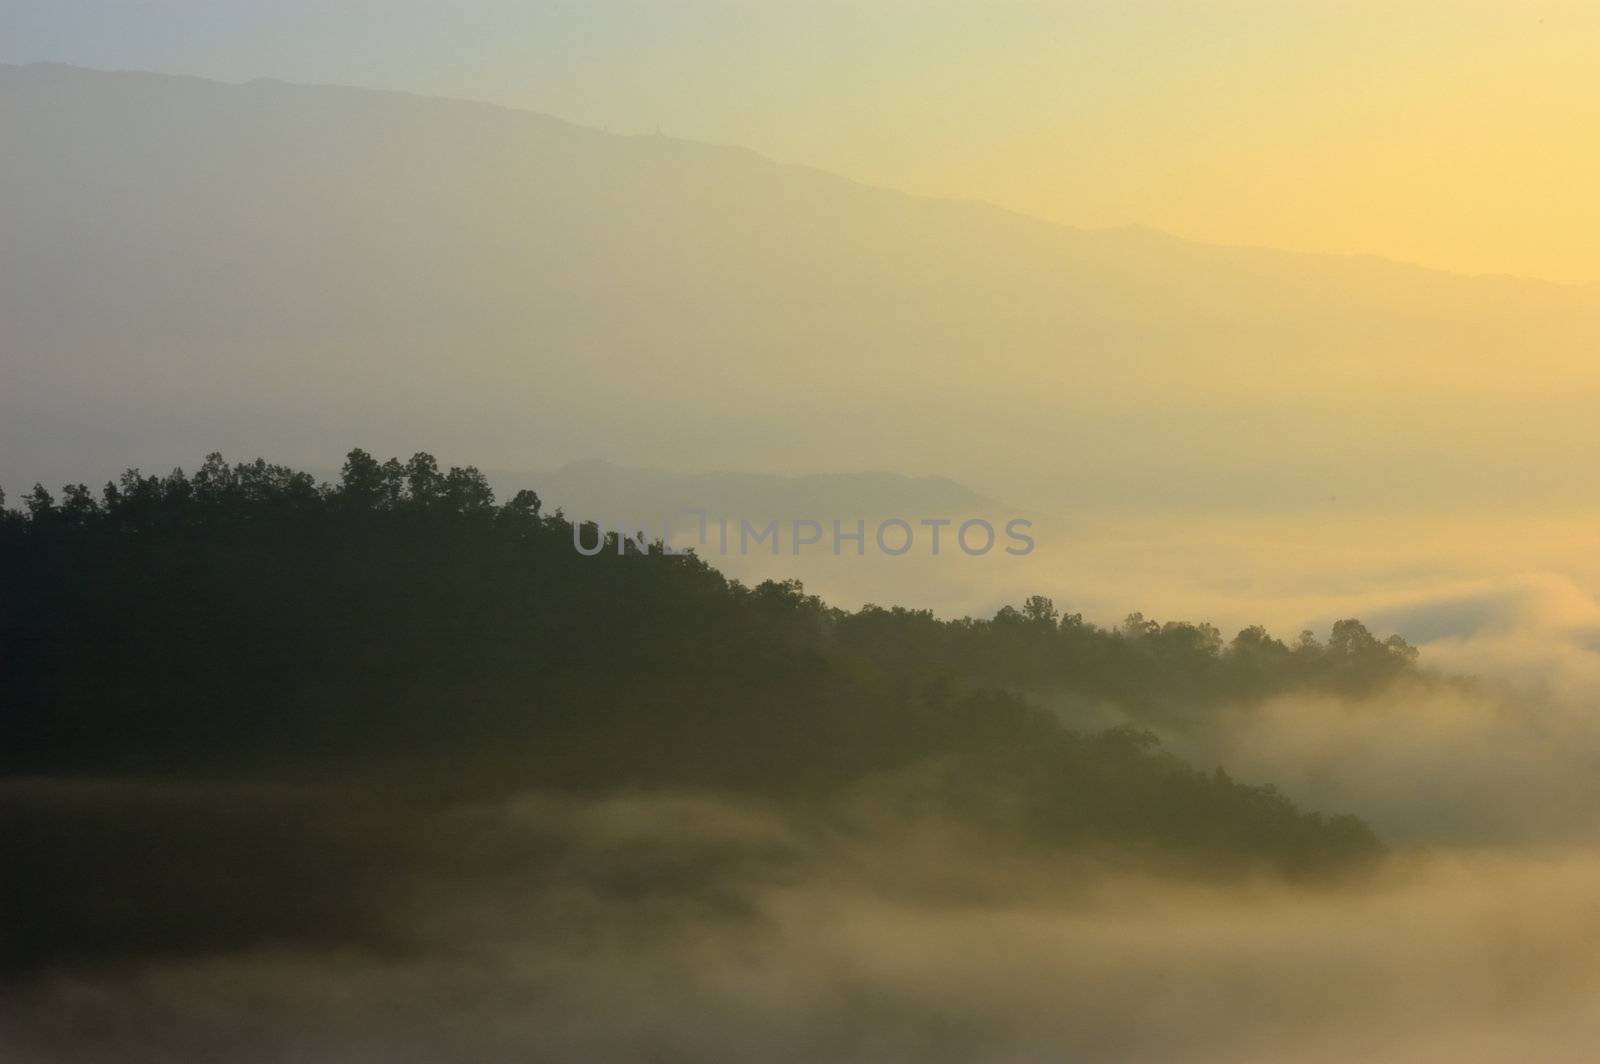 Sunrise at sea fog mountain national park. by ngungfoto